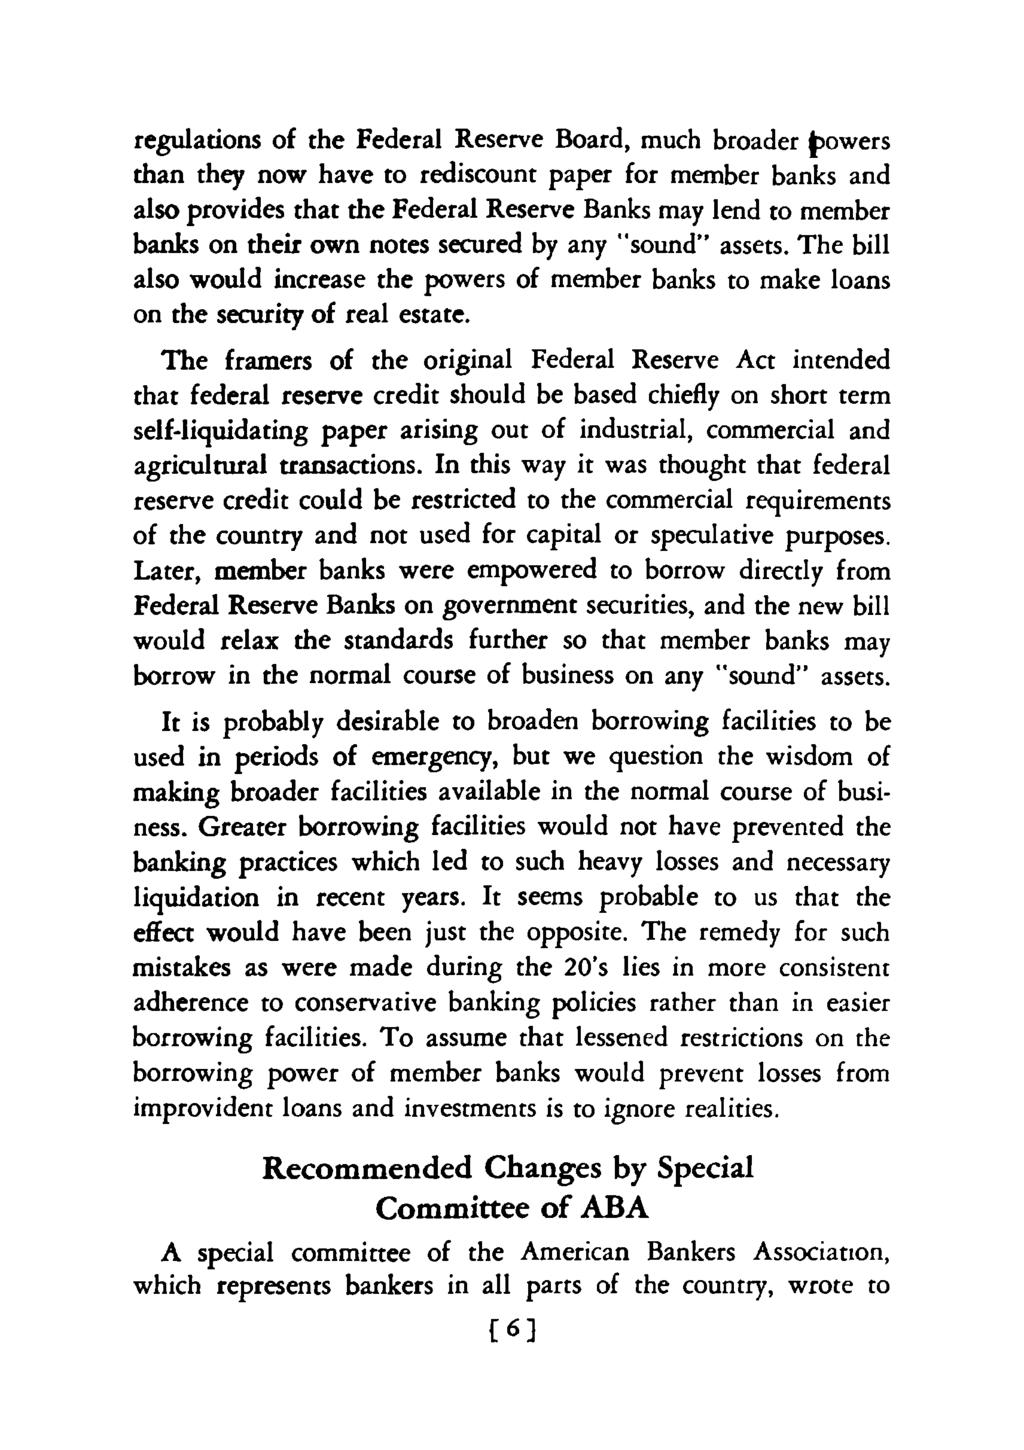 regulations of the Federal Reserve Board, much broader powers than they now have to rediscount paper for member banks and also provides that the Federal Reserve Banks may lend to member banks on